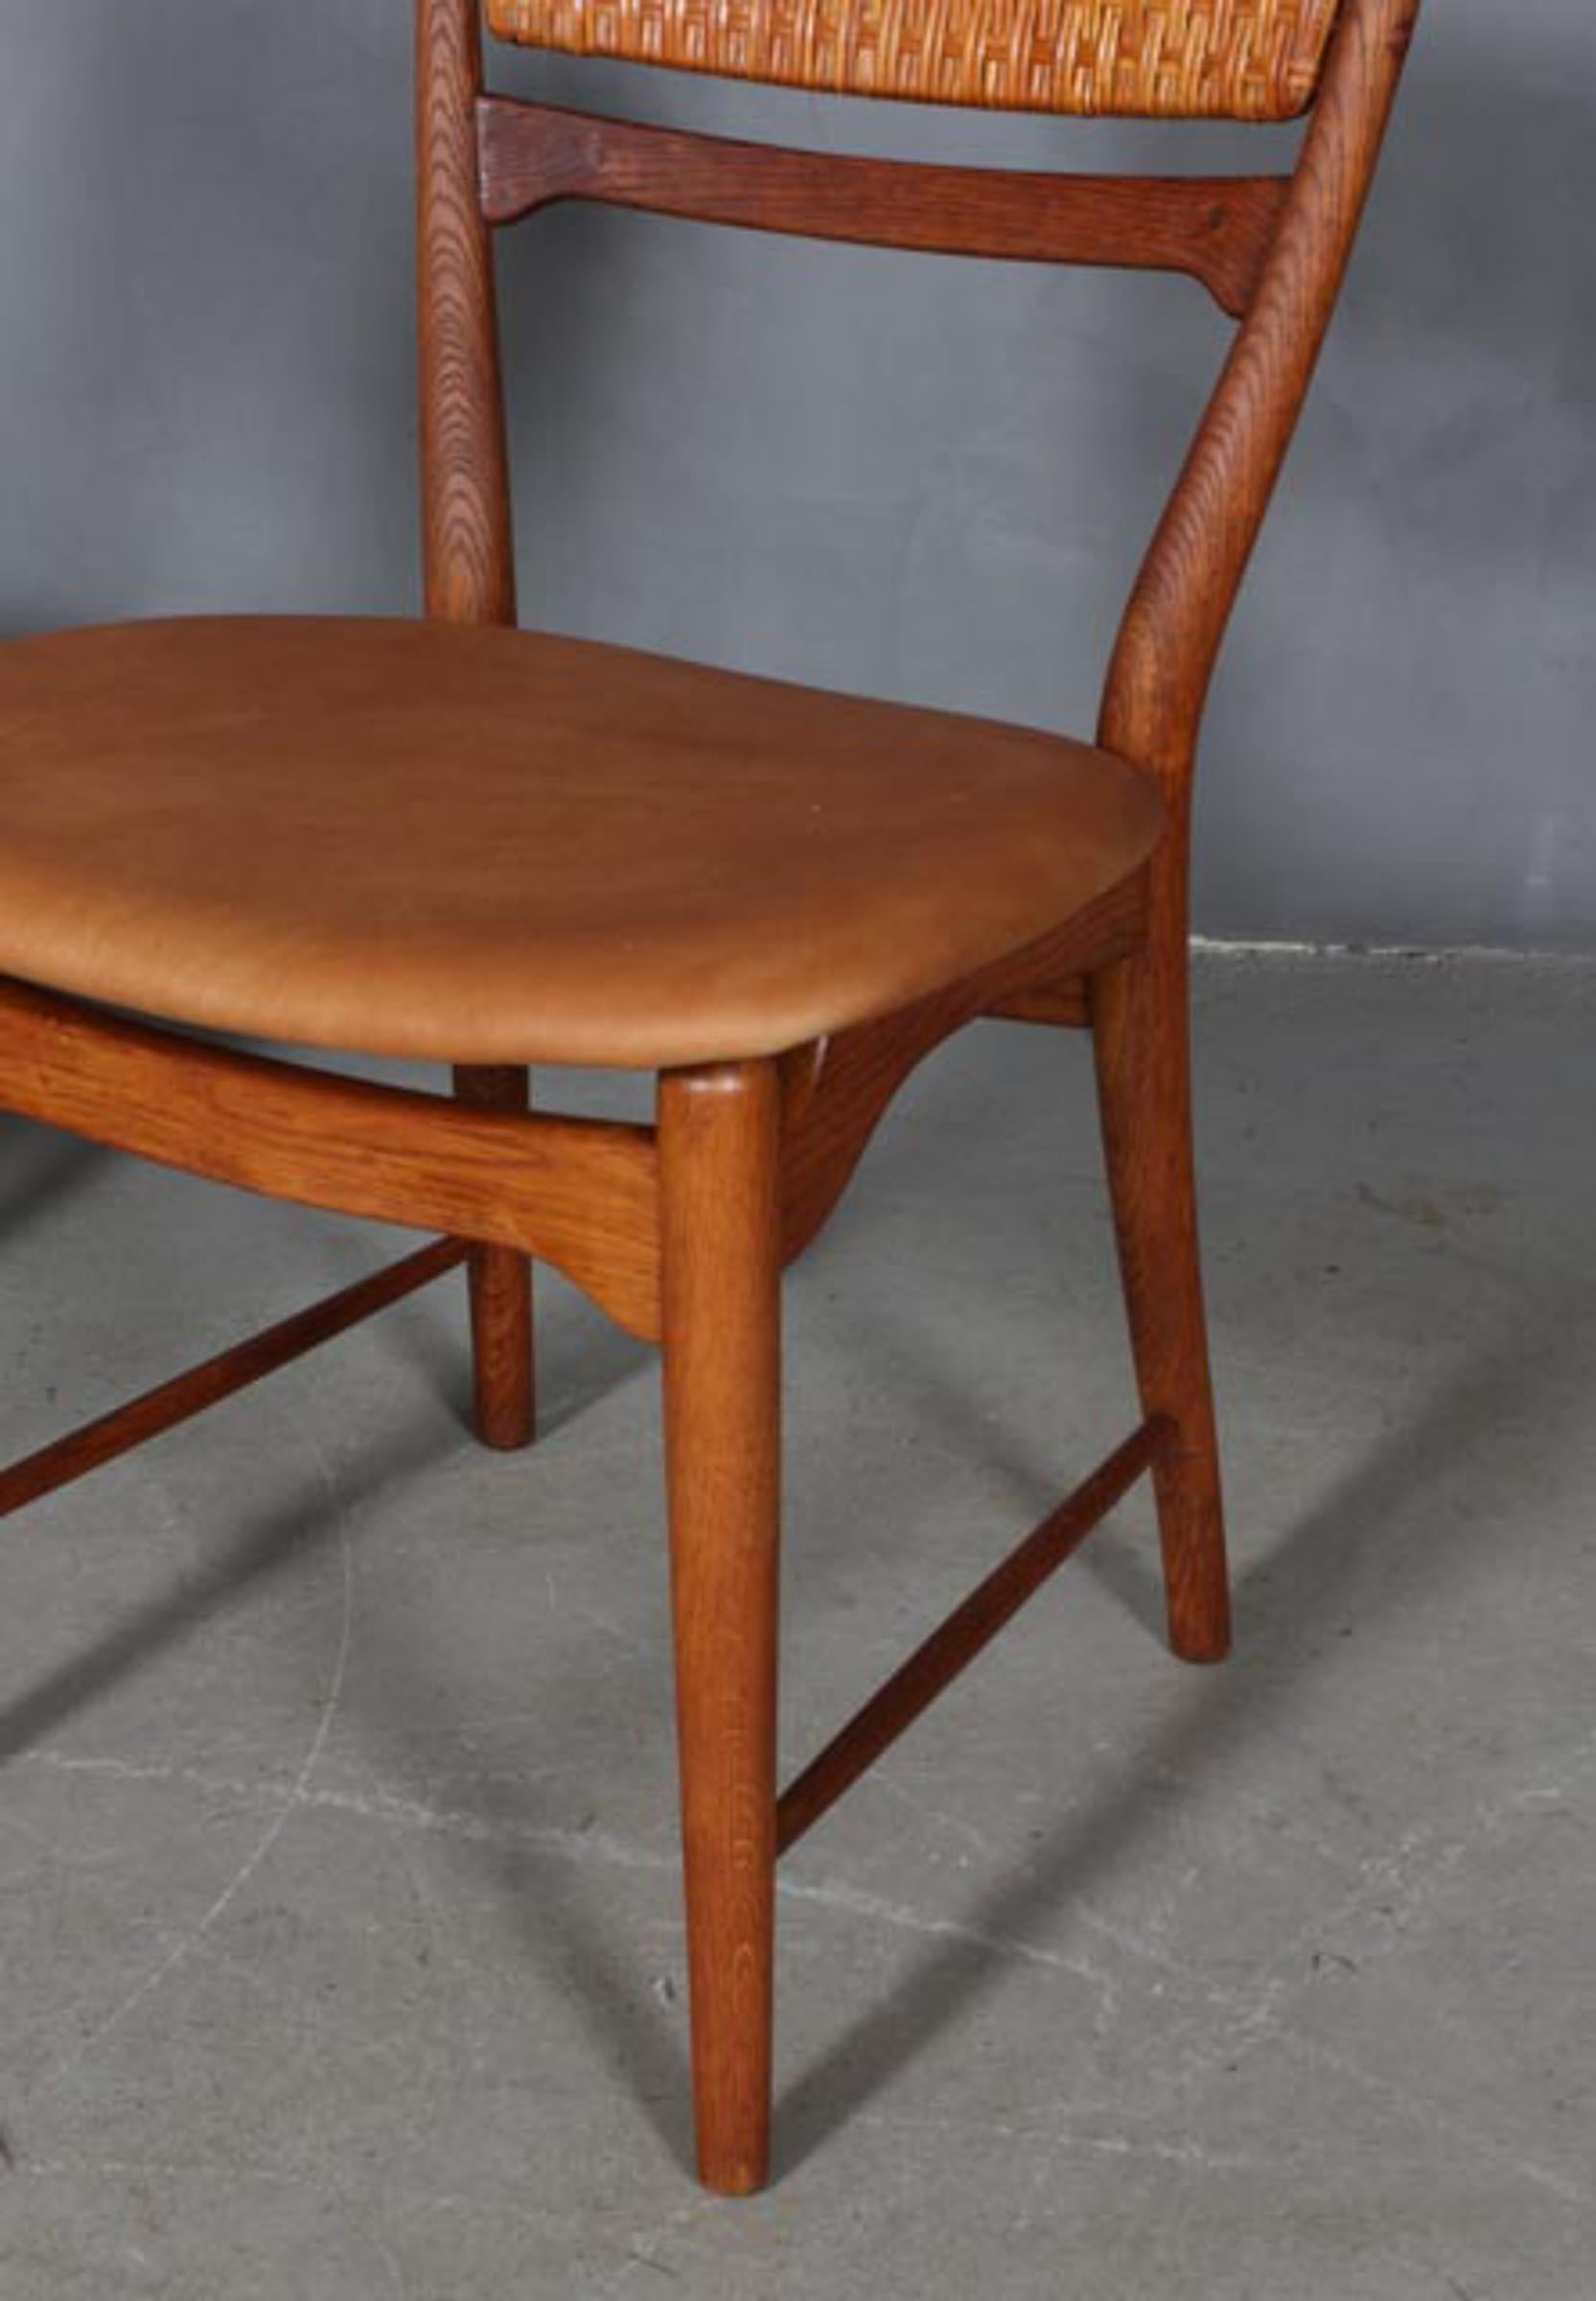 Mid-20th Century Arne Wahl Iversen Pair of Side Chairs, Cane and Leather